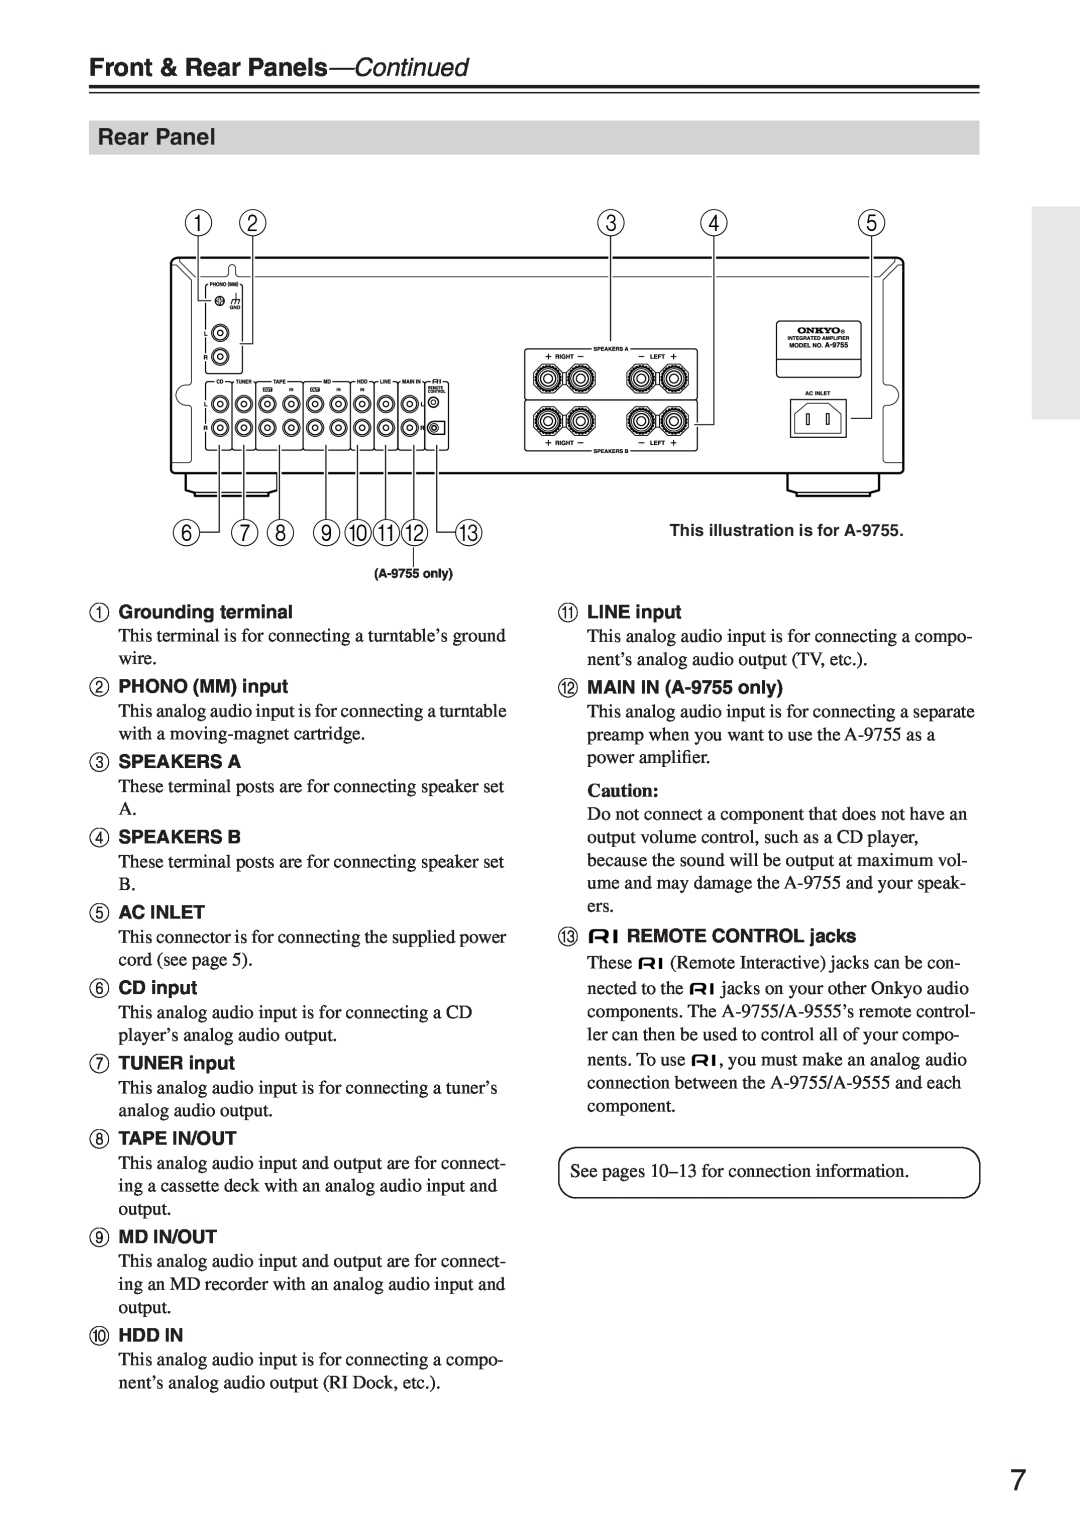 Onkyo A-9755, 9555 instruction manual 1 6 7 8 90AB C, Front & Rear Panels-Continued 